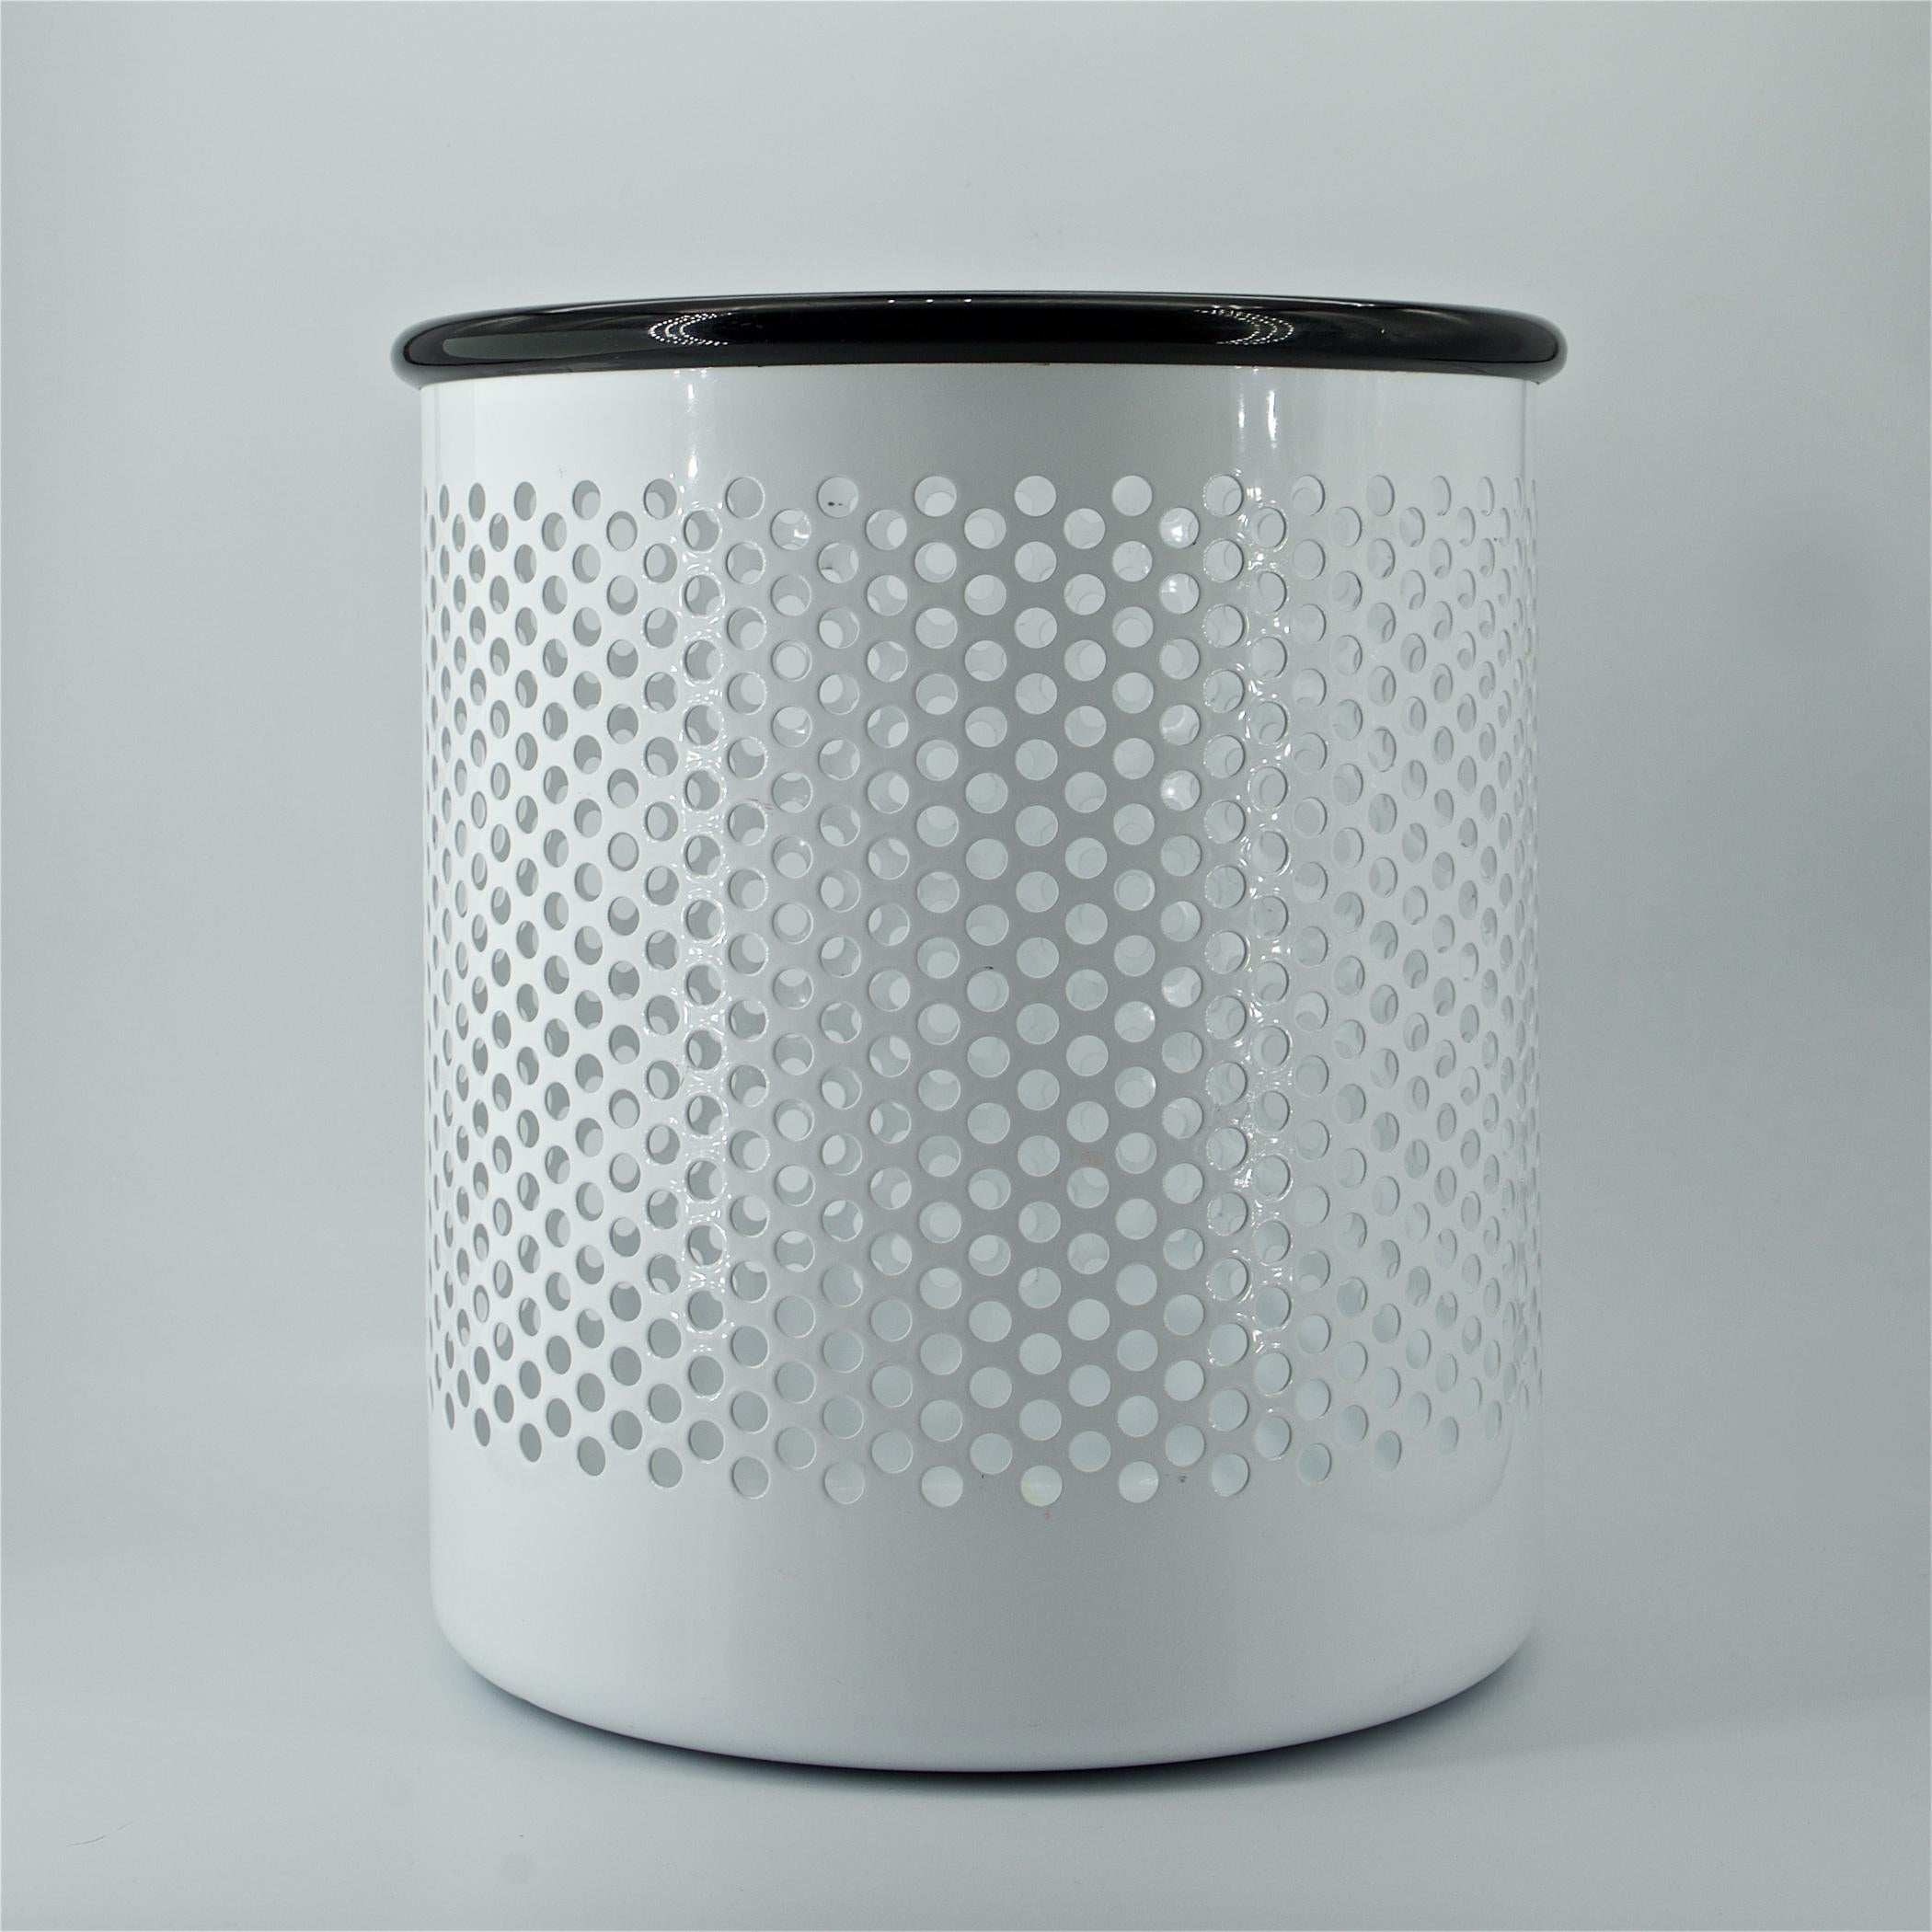 Memphis style wastebasket, light use. A bit more uncommon of a color, Made in Italy.